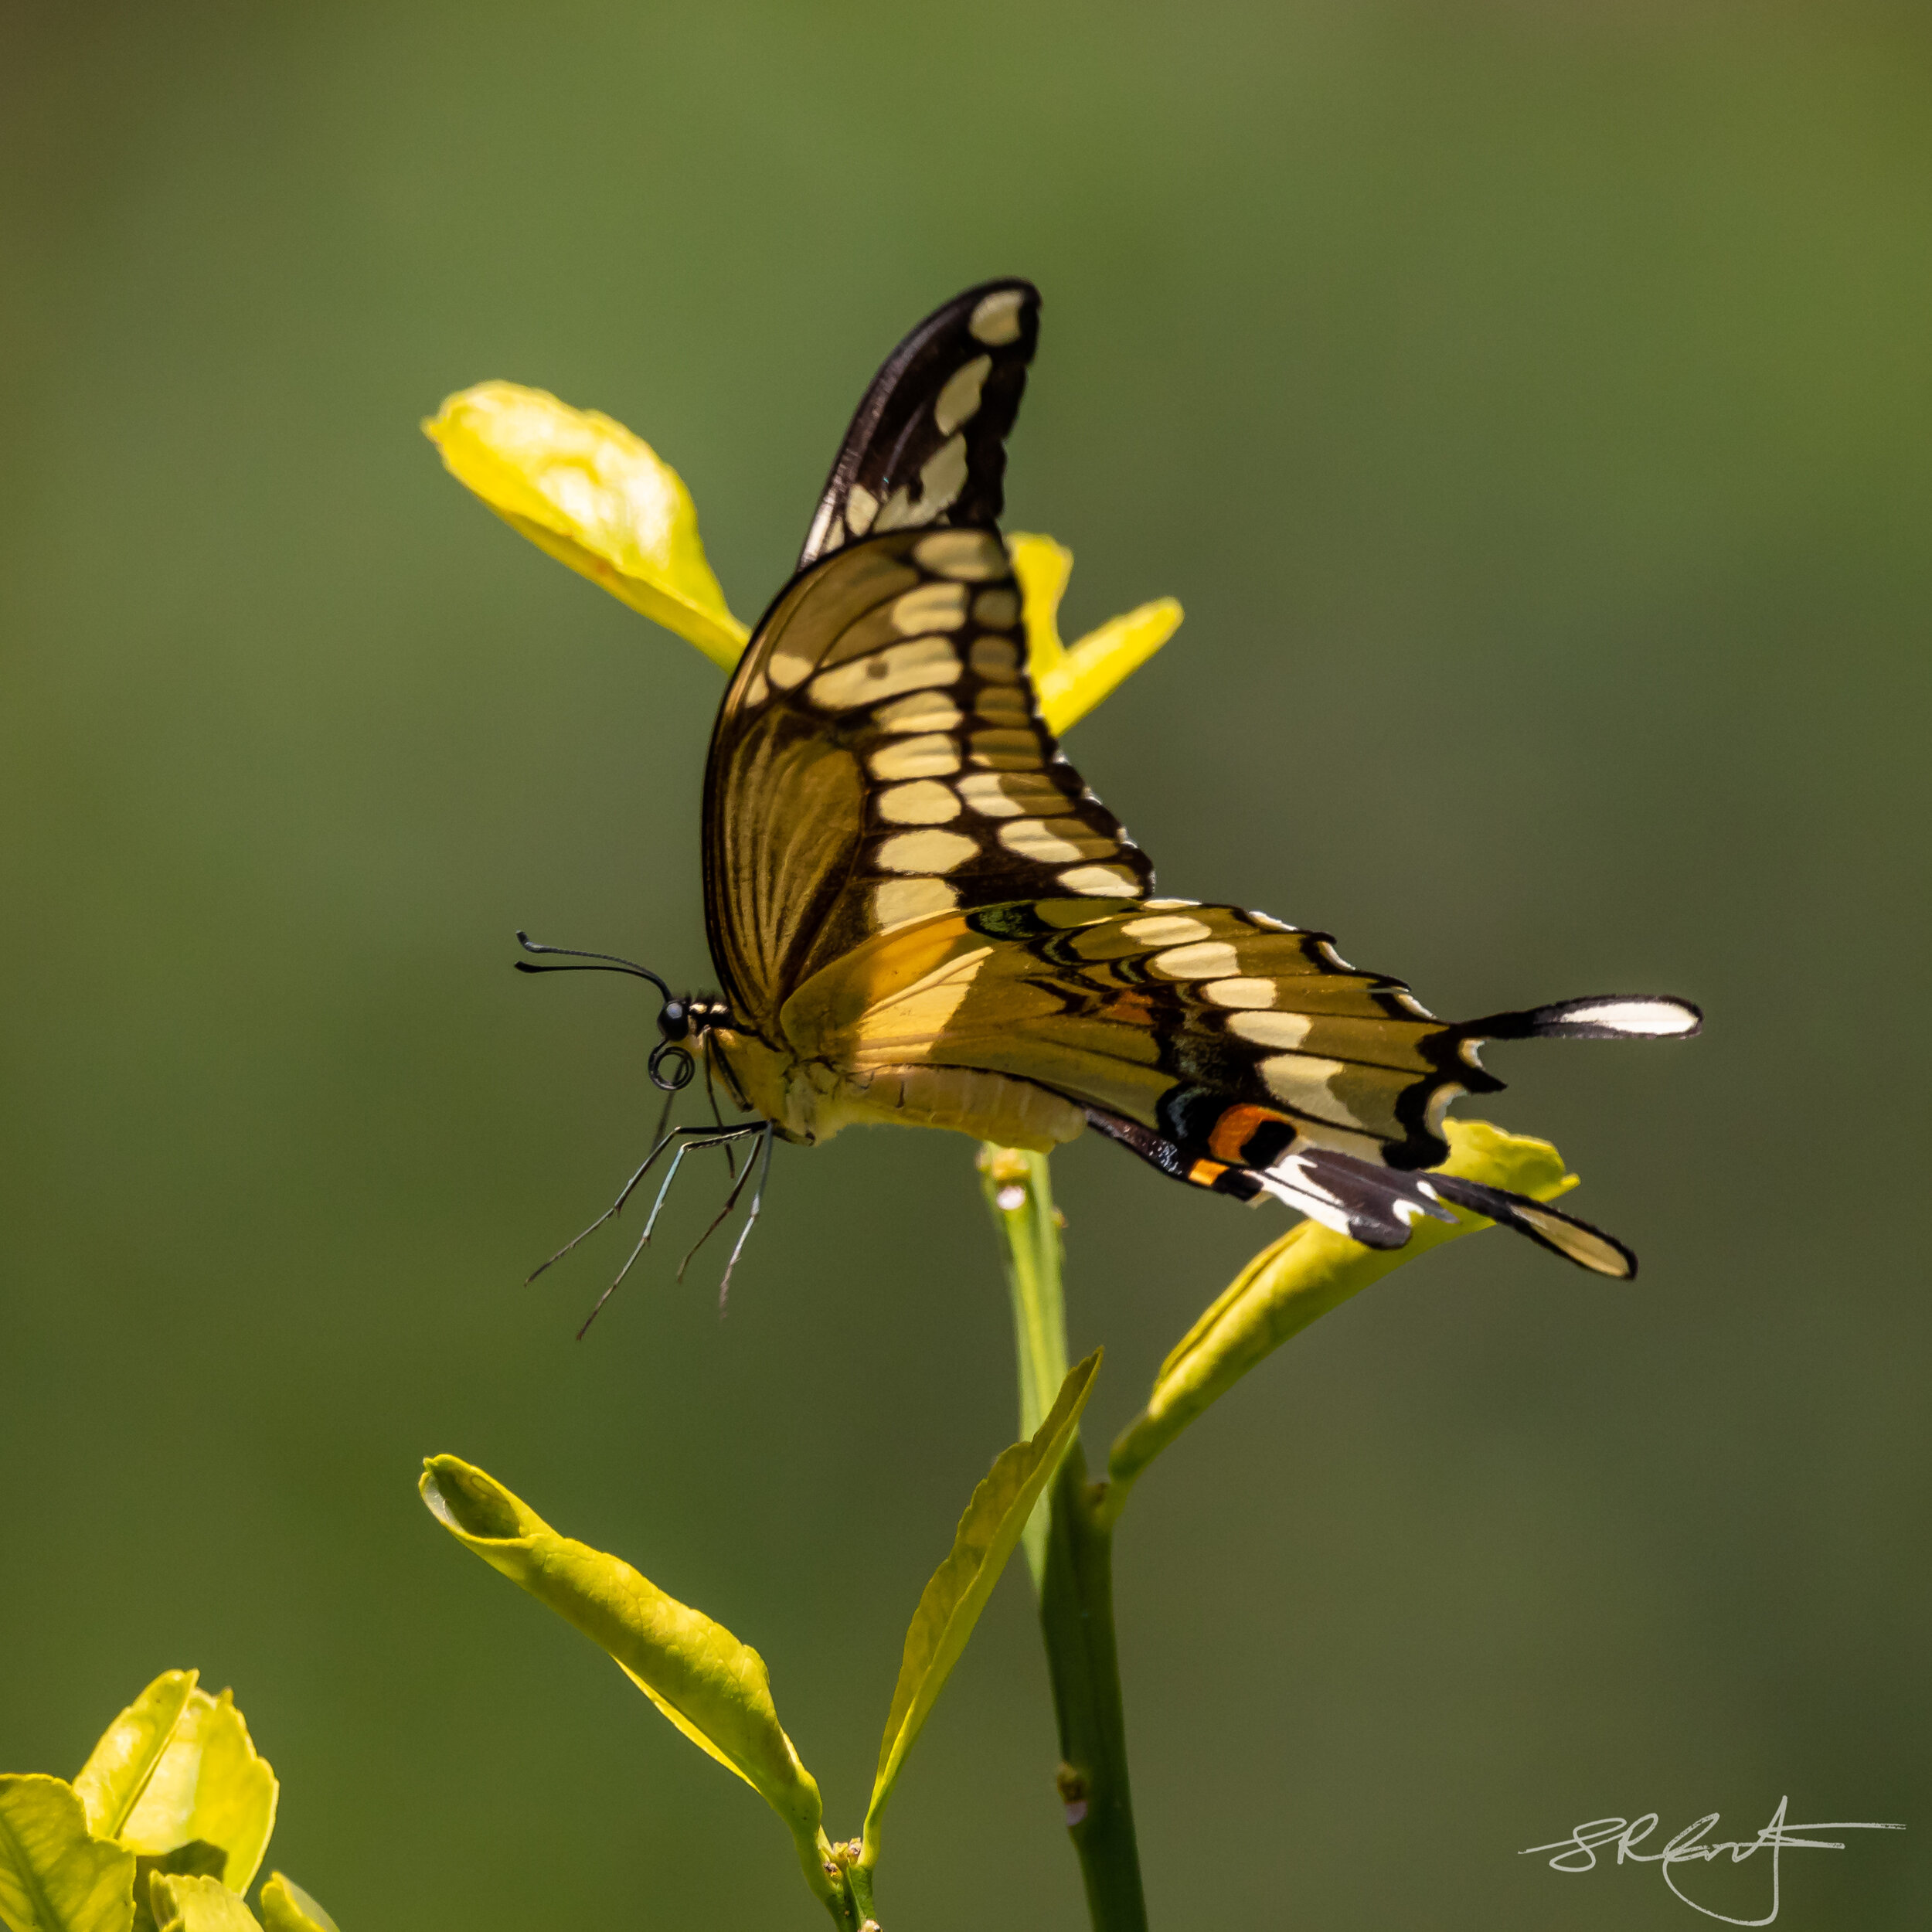 Giant Swallowtail Butterfly.